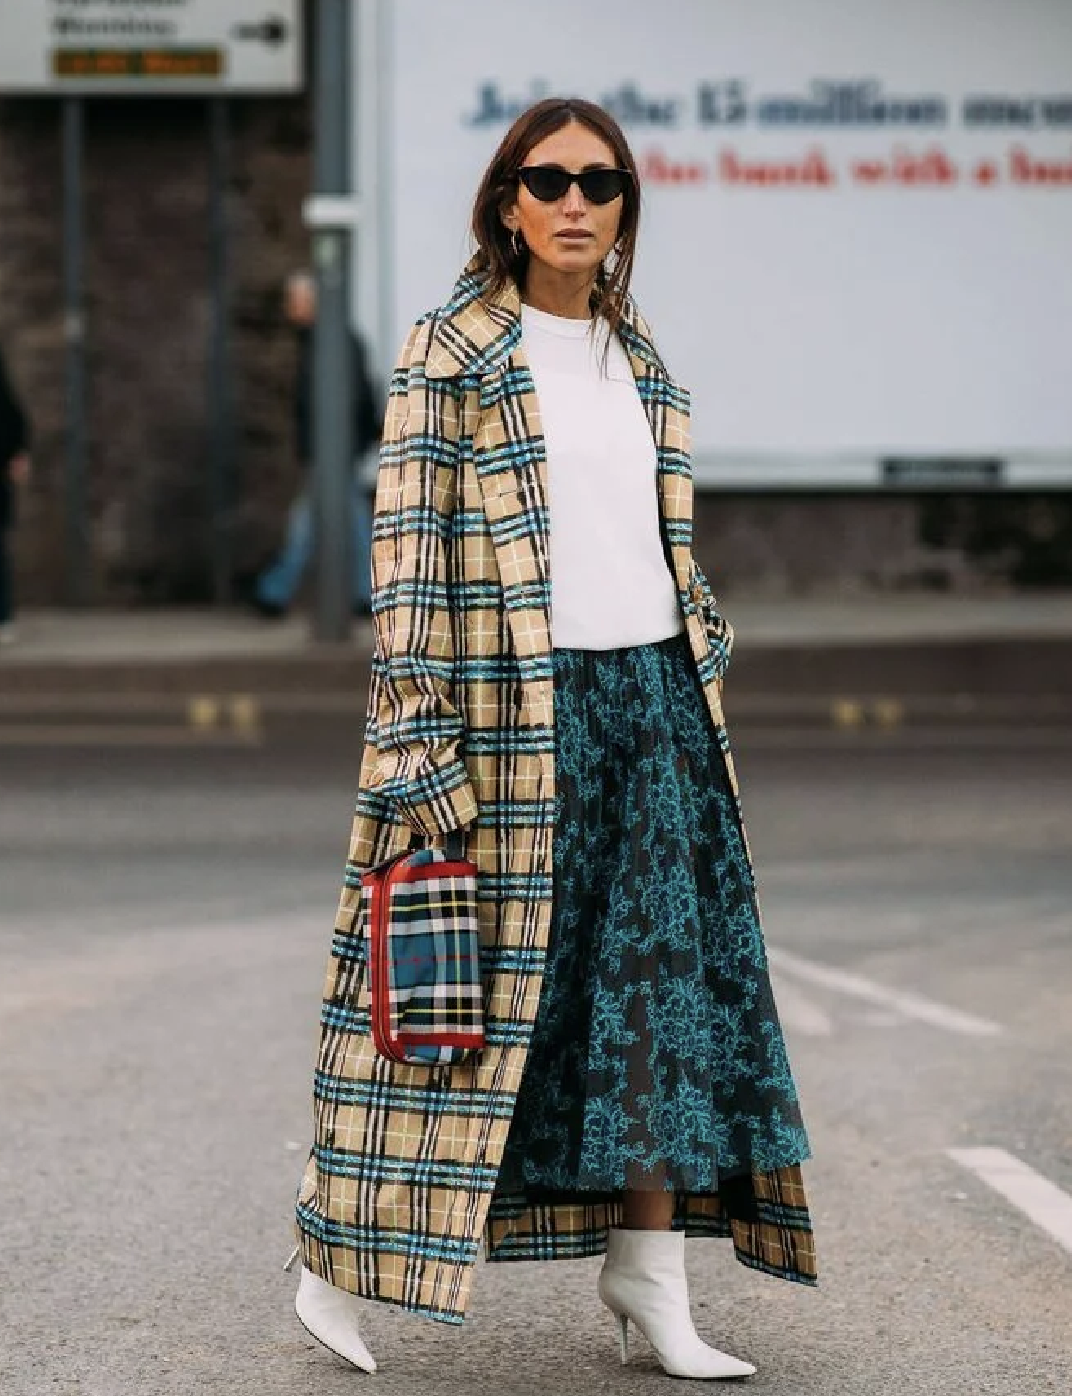 Printed skirts are a new trend.